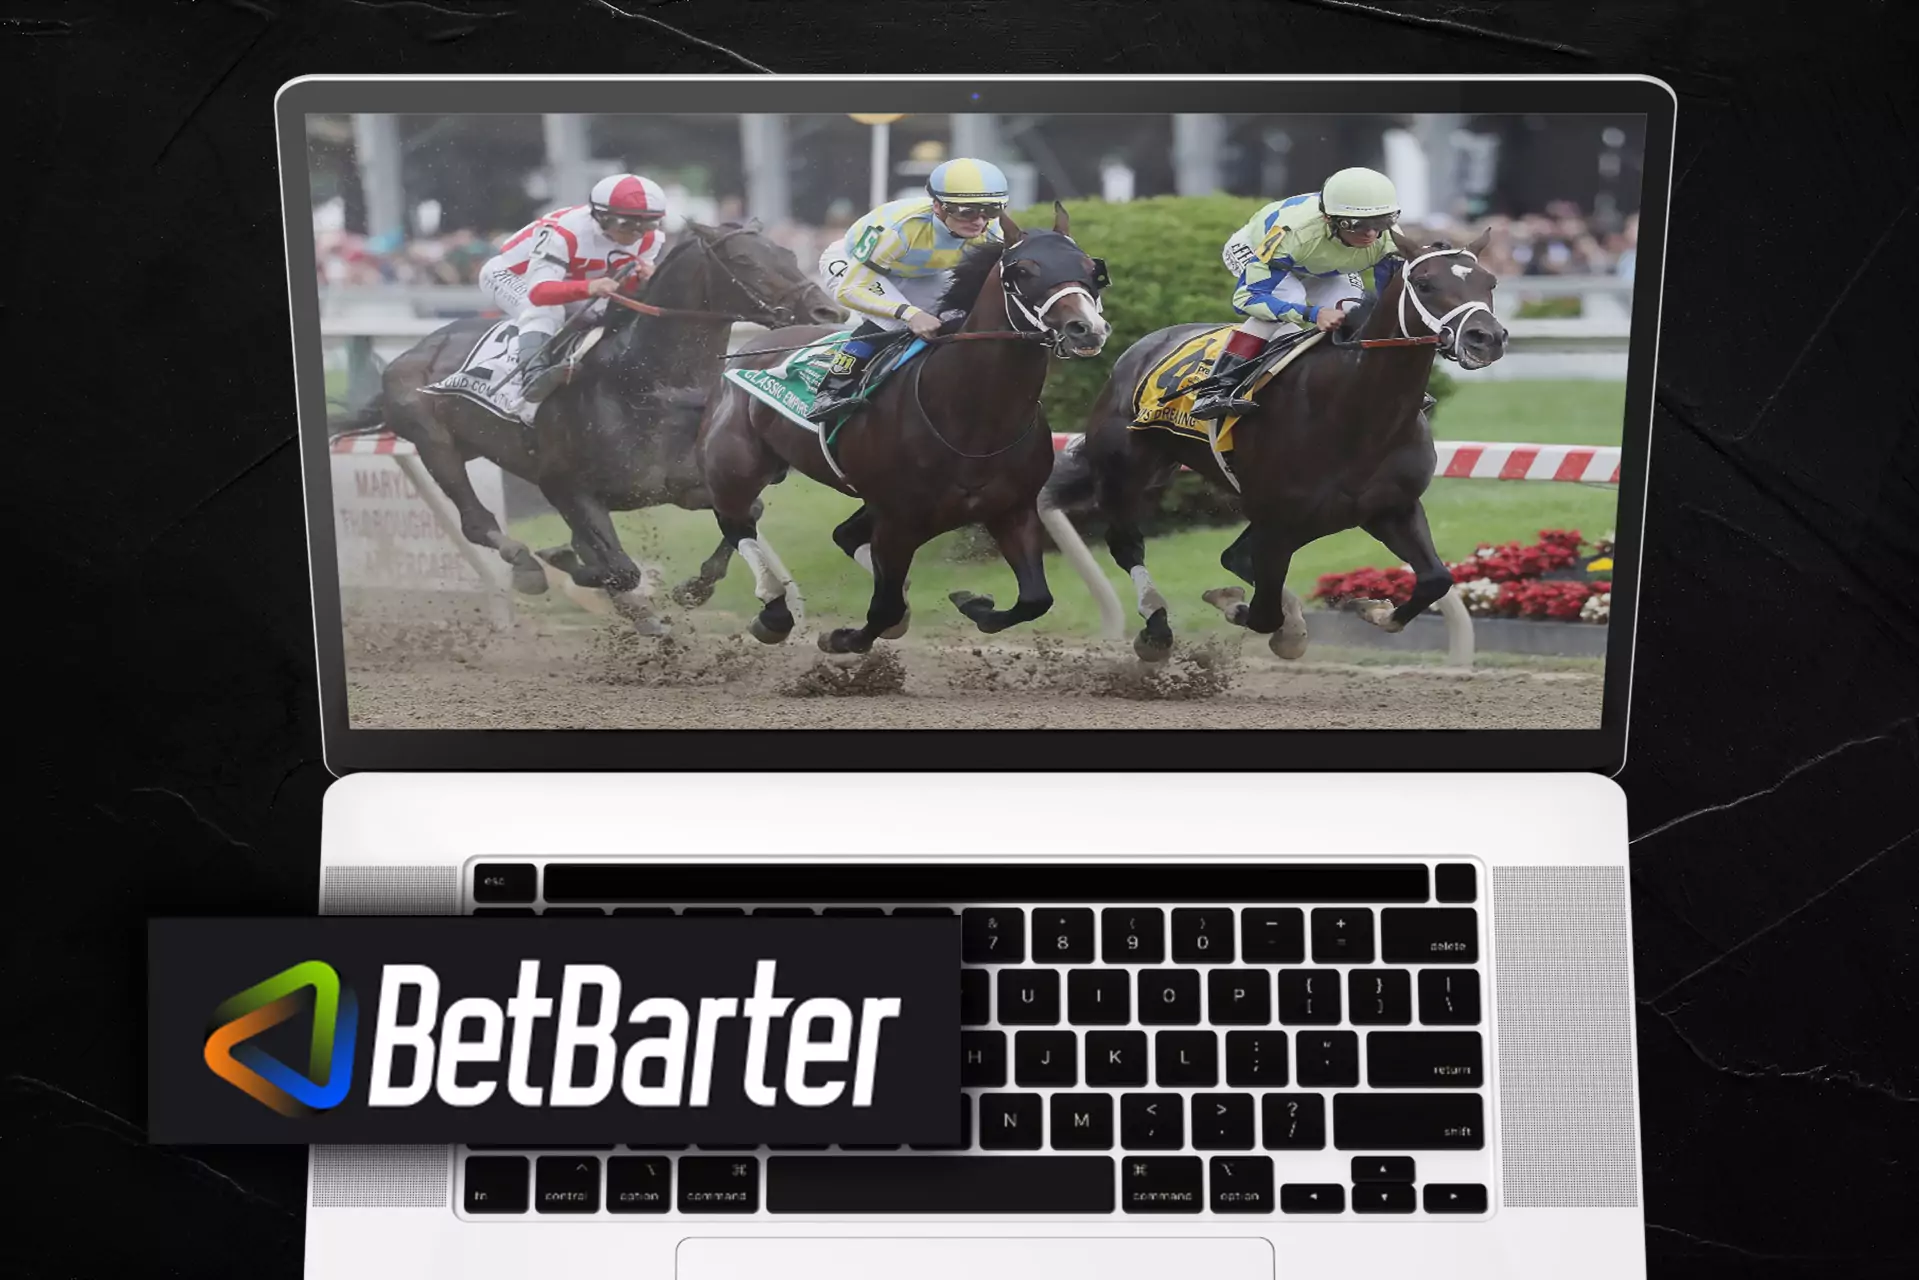 BetBarter supports horse racing betting.